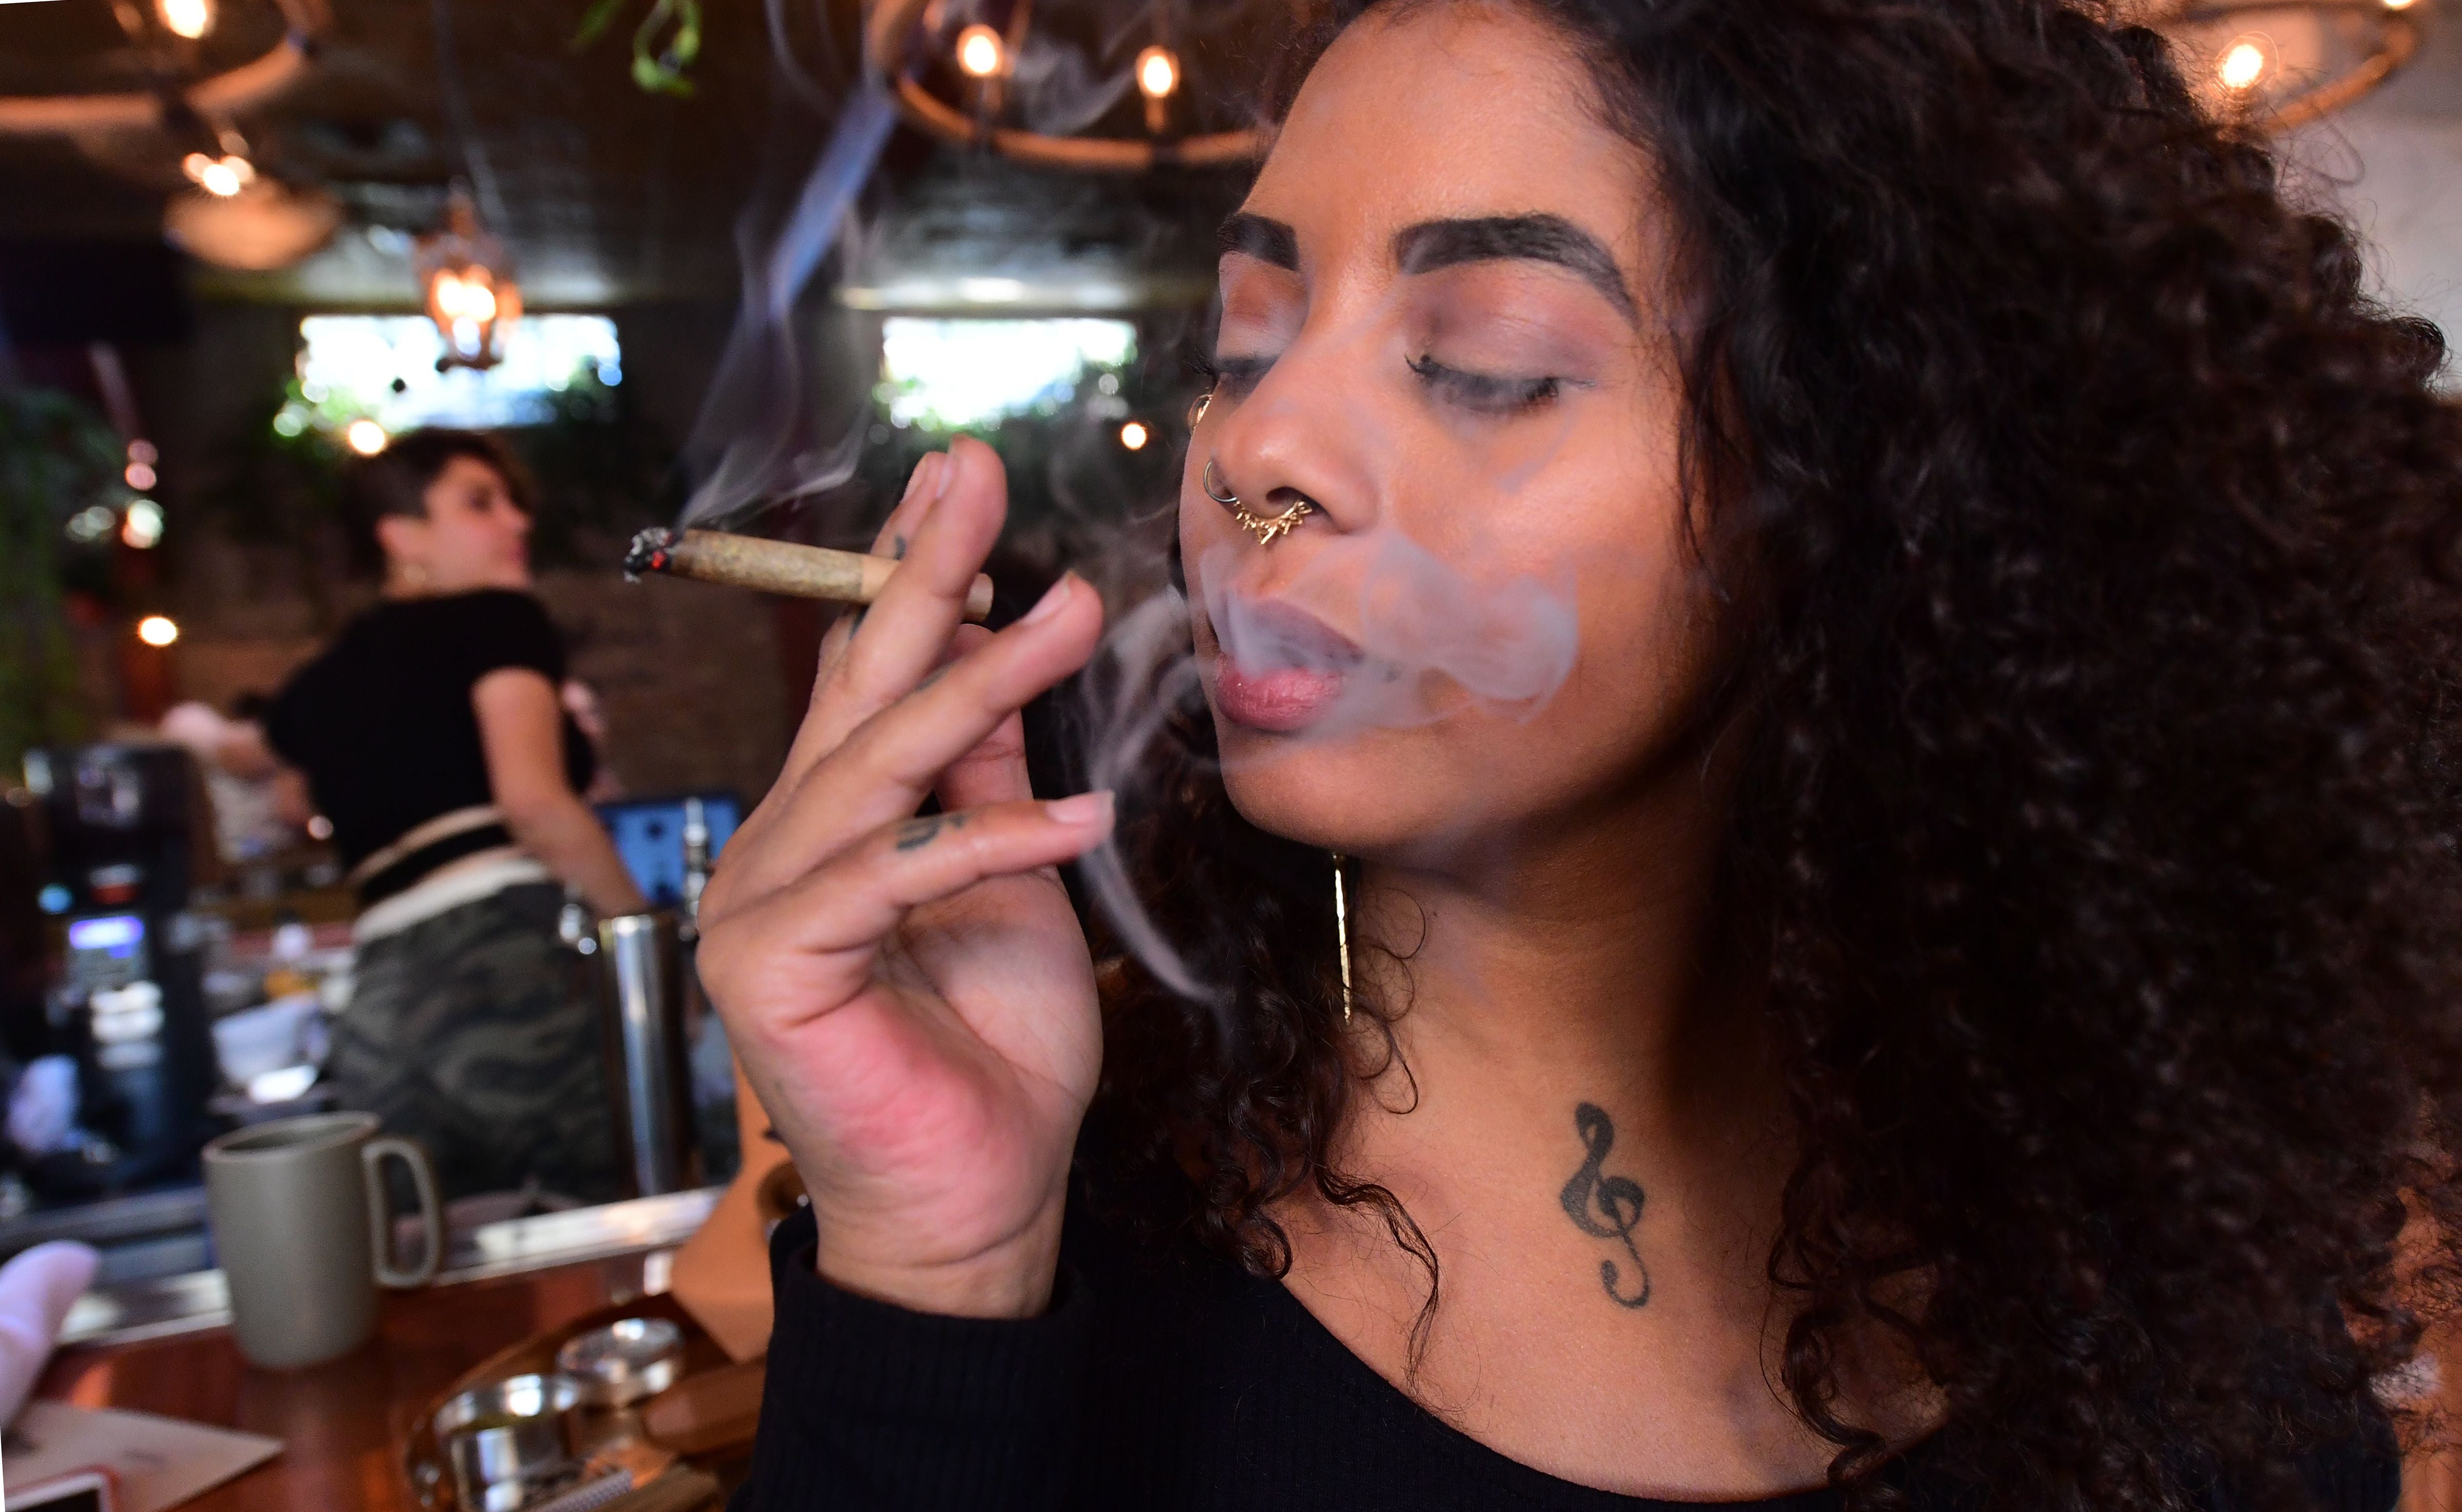 Kush Doleo smokes a joint at the Lowell Cafe in West Hollywood, which offers diners an array of weed products